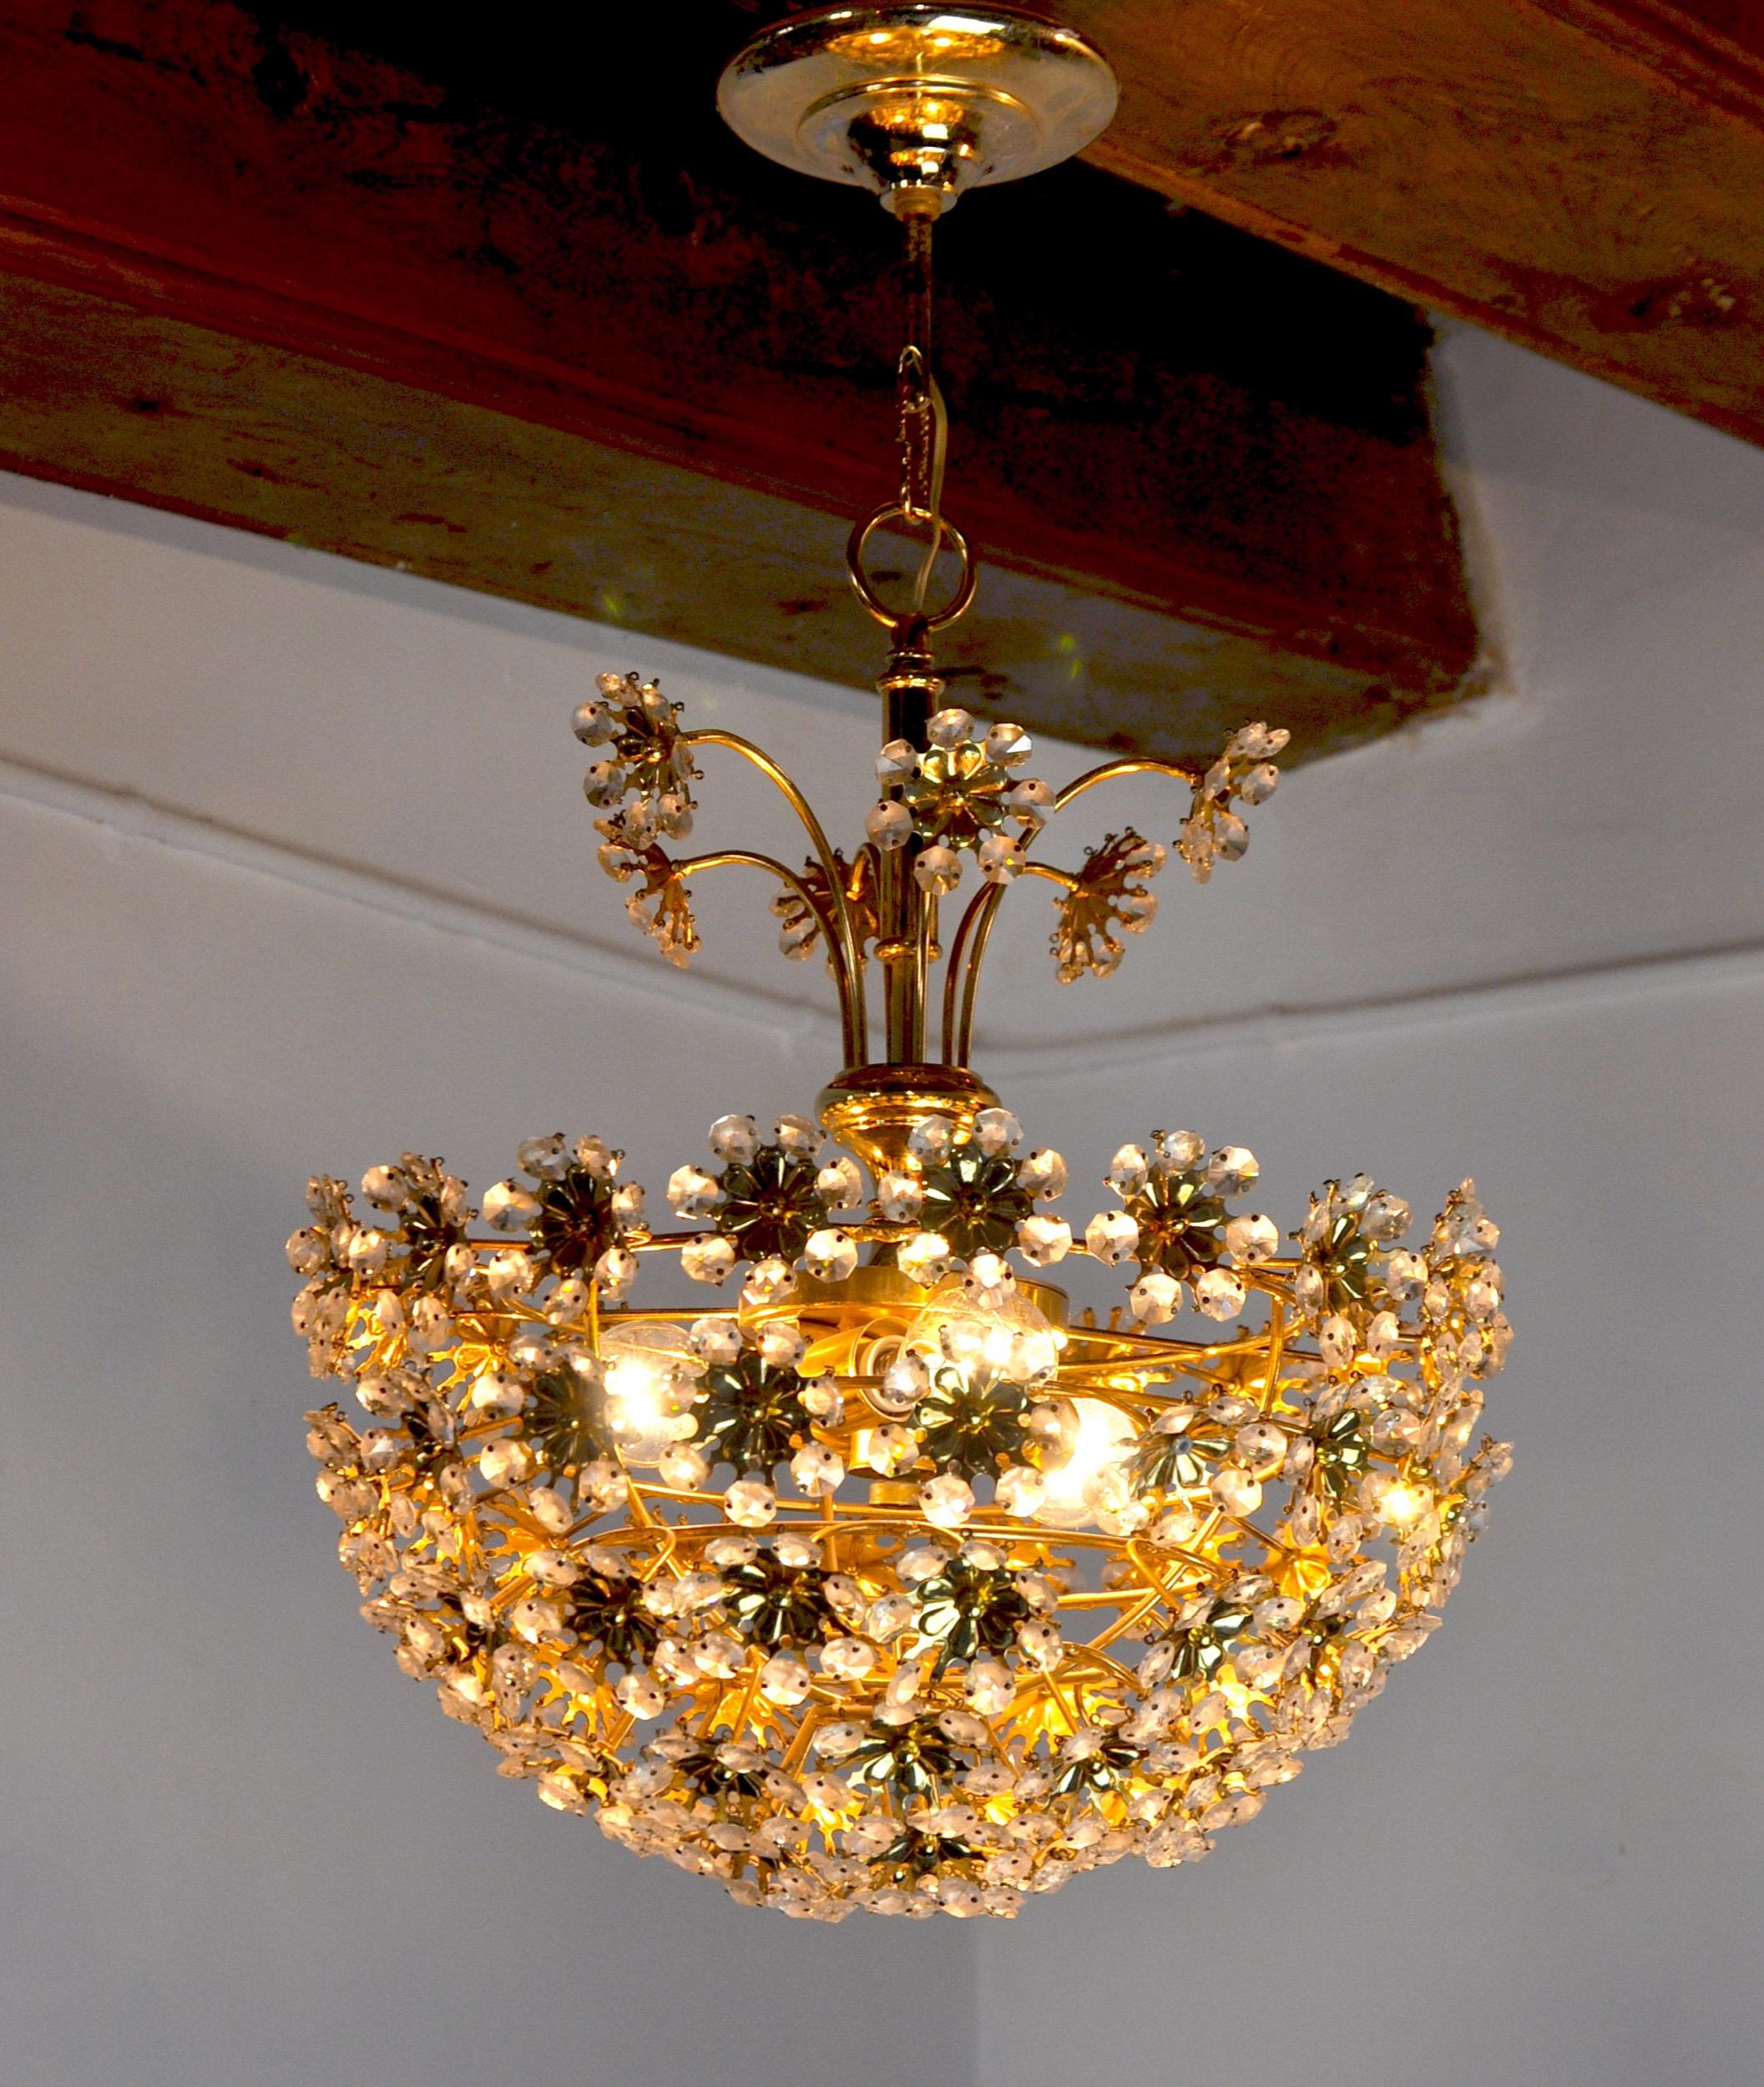 Rare and large floral chandelier in cut crystals, designed and produced by bakalowits & söhne in austria in the 1970s.

Golden structure composed of crystals cut in perfect condition.

Rare design object that will illuminate your interior